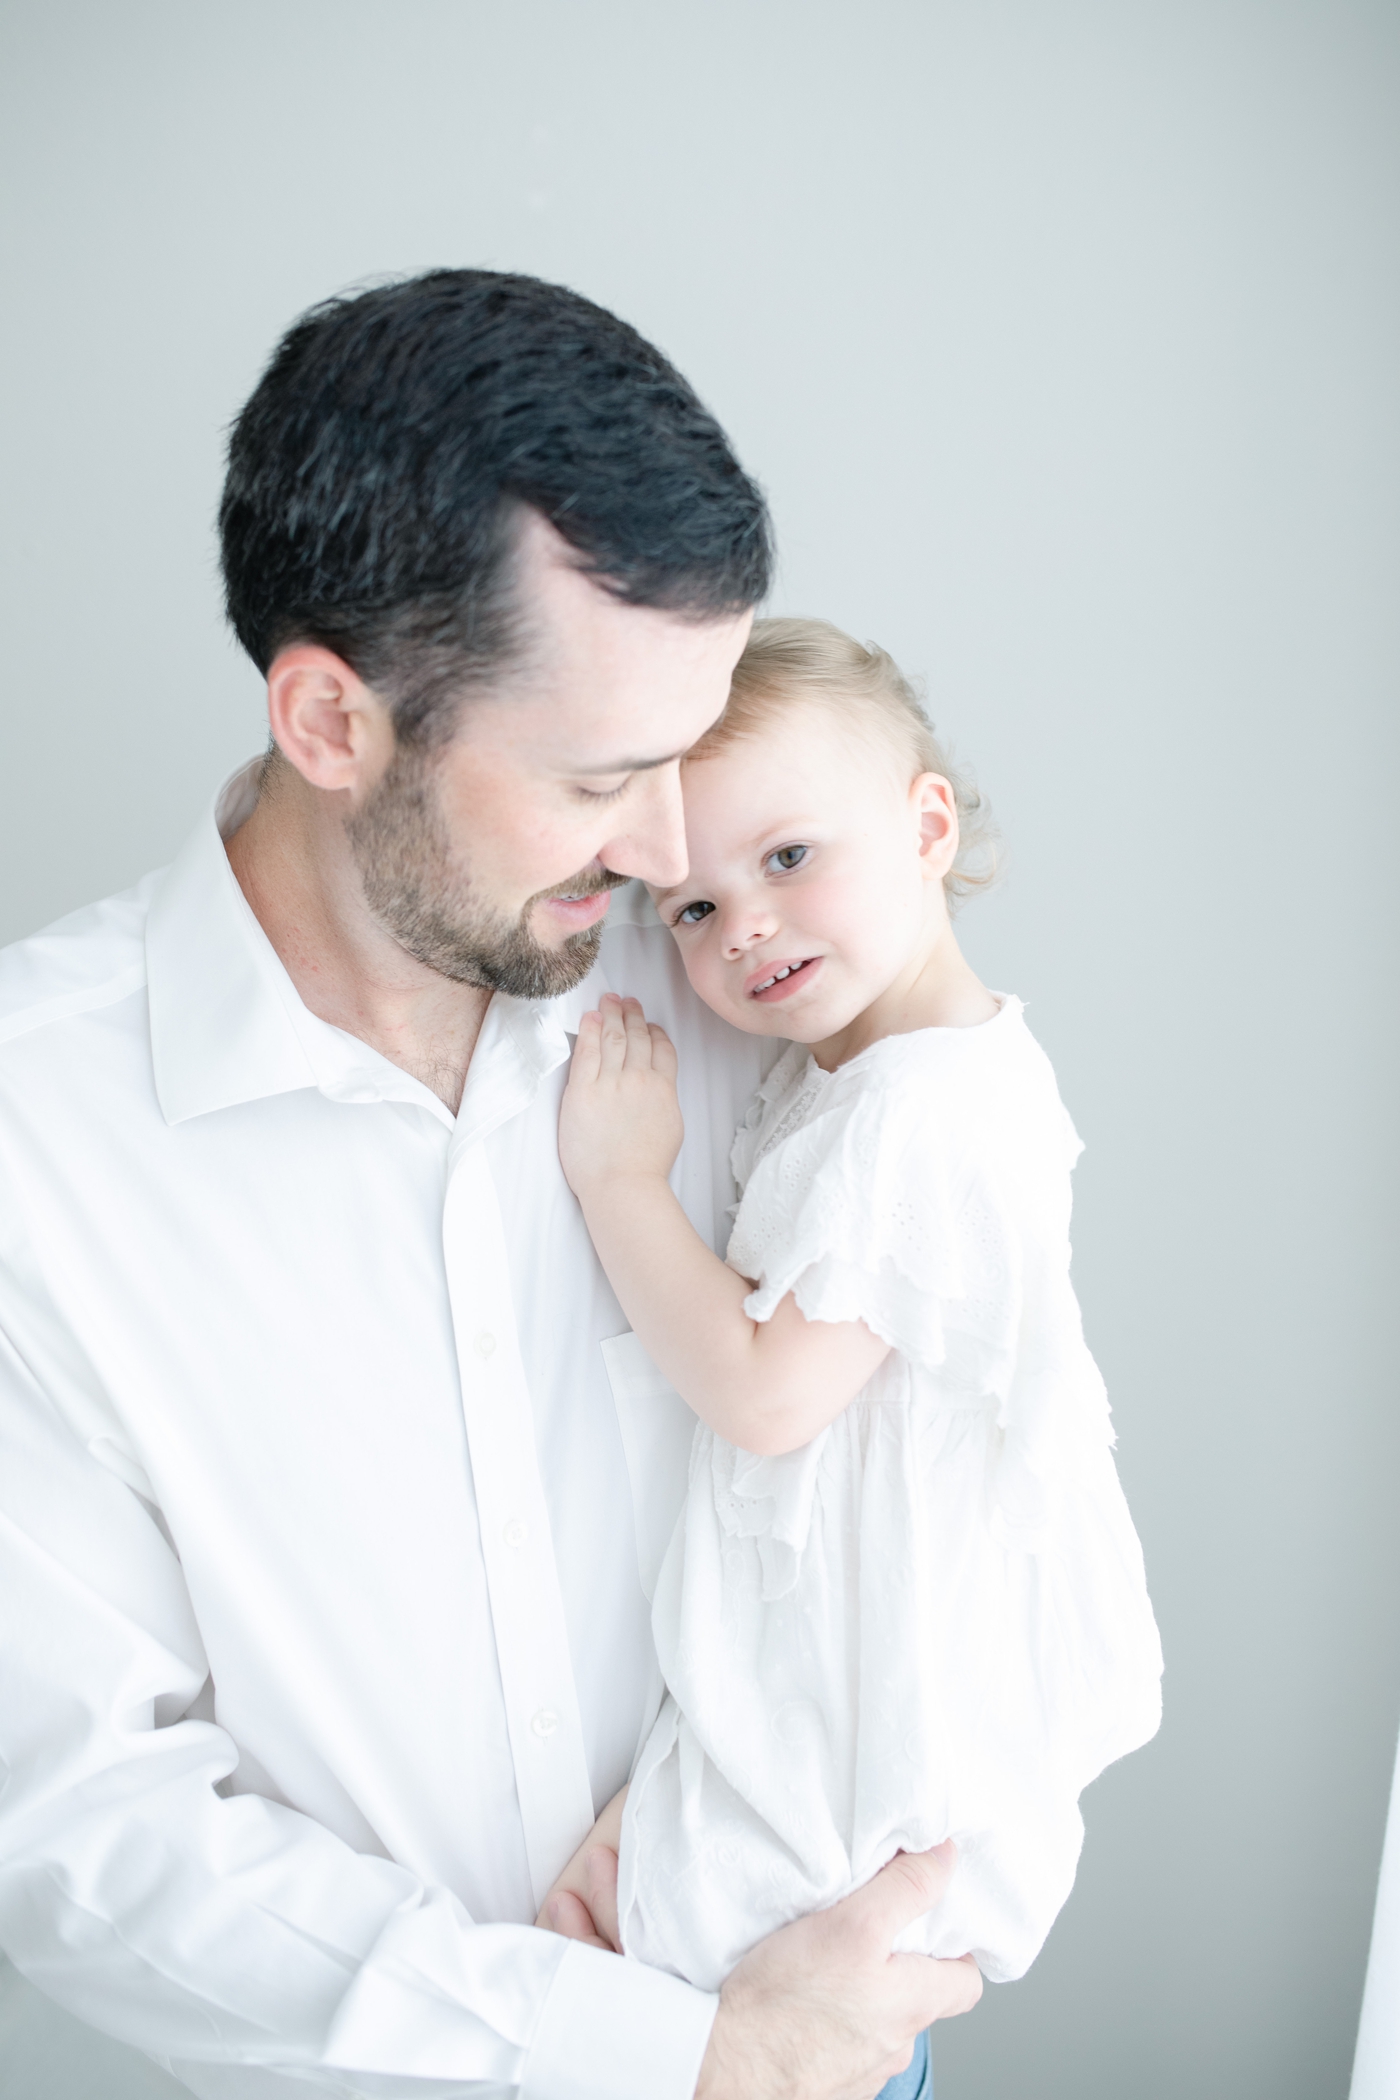 Dad holding toddler during newborn session in studio. Photo by Little Sunshine Photography.